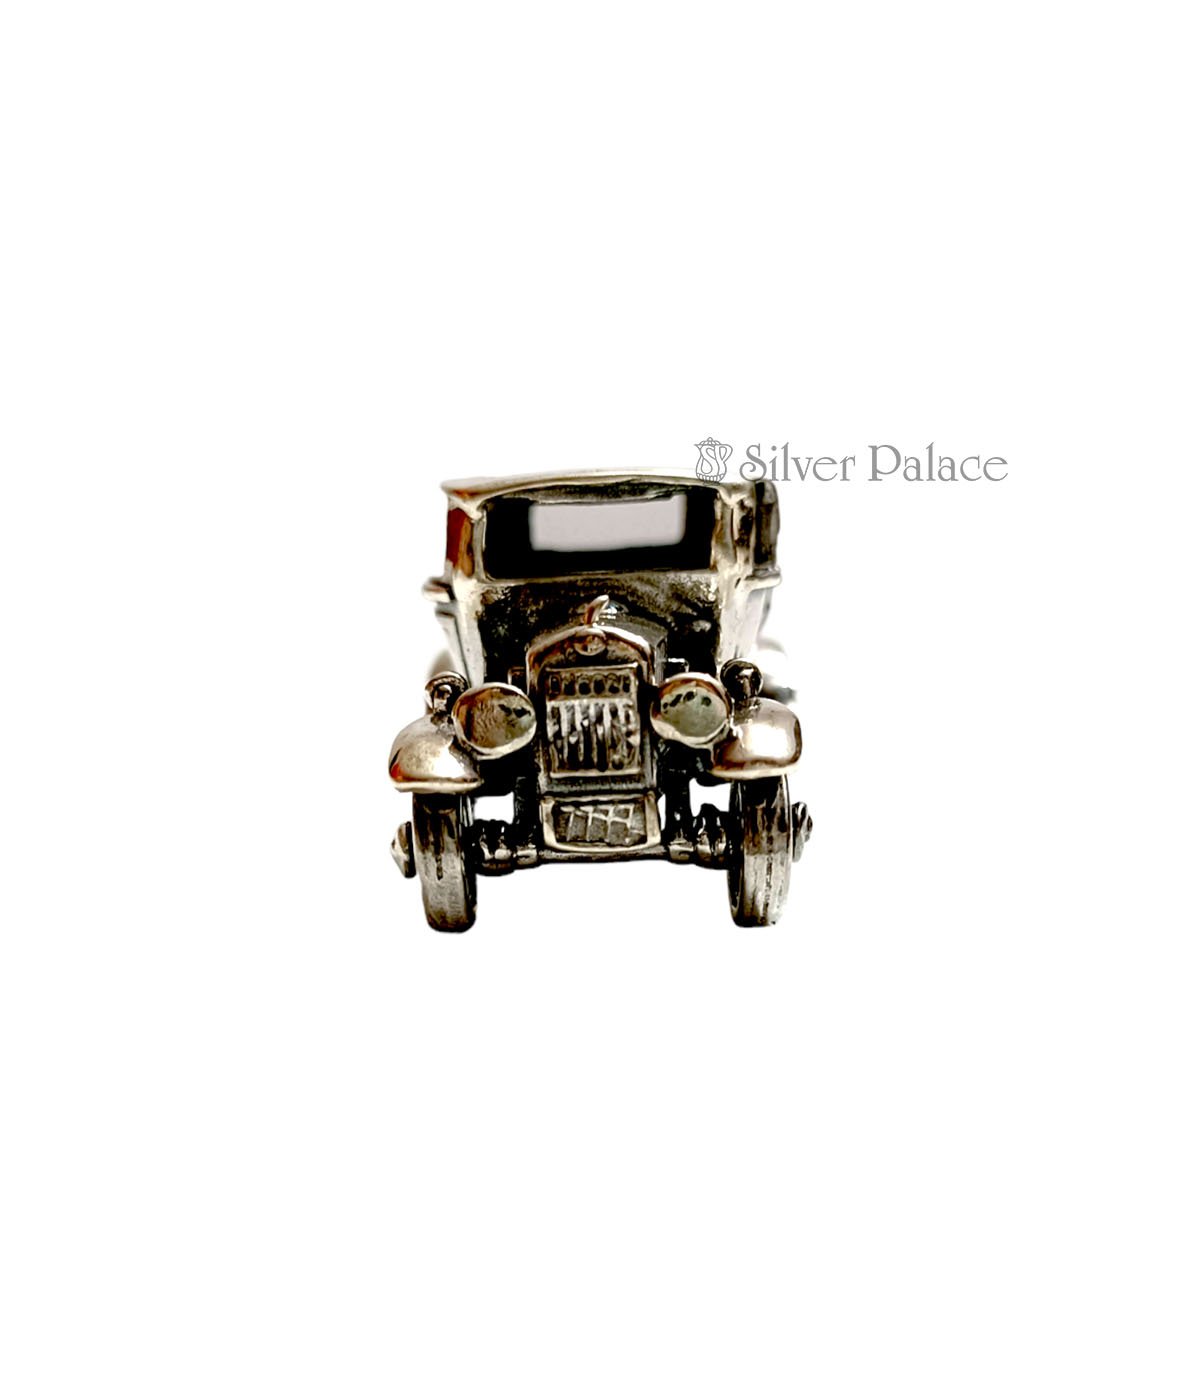 STERLING SILVER MINIATURE JEEP GIFT